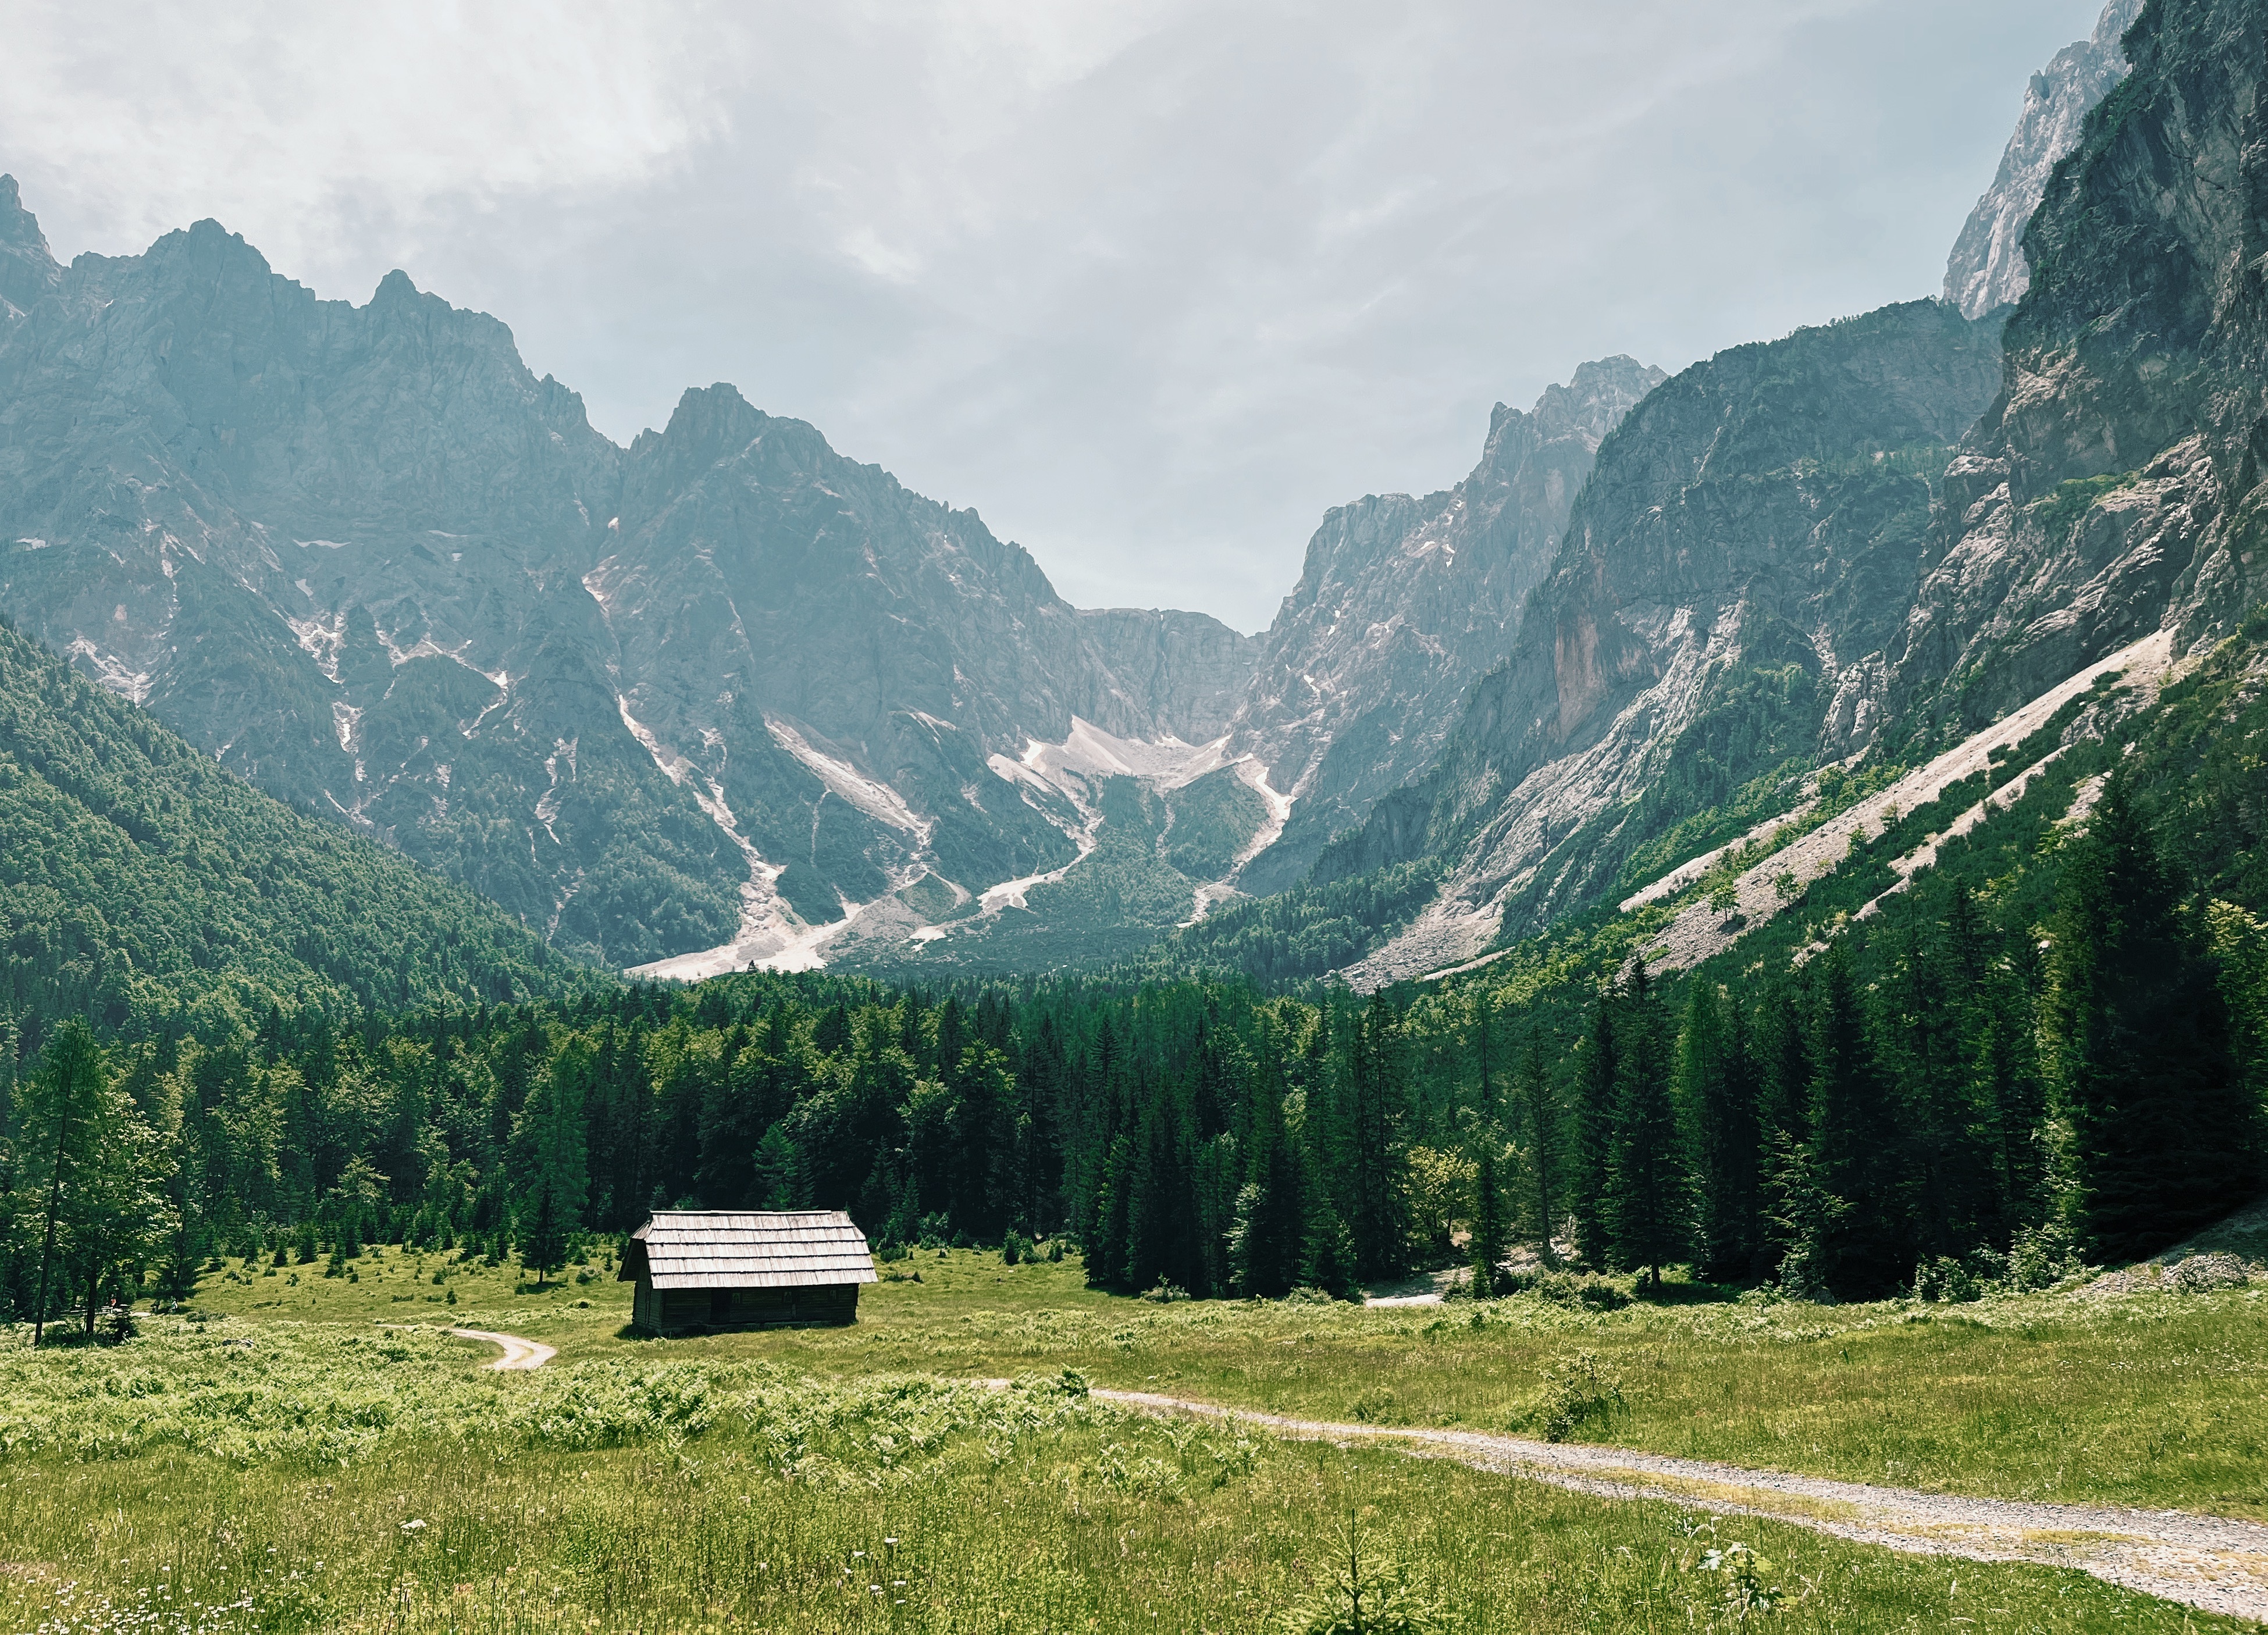 Mountain hut in front of Julian Alps while hiking the Alpe Adria Trail in Slovenia